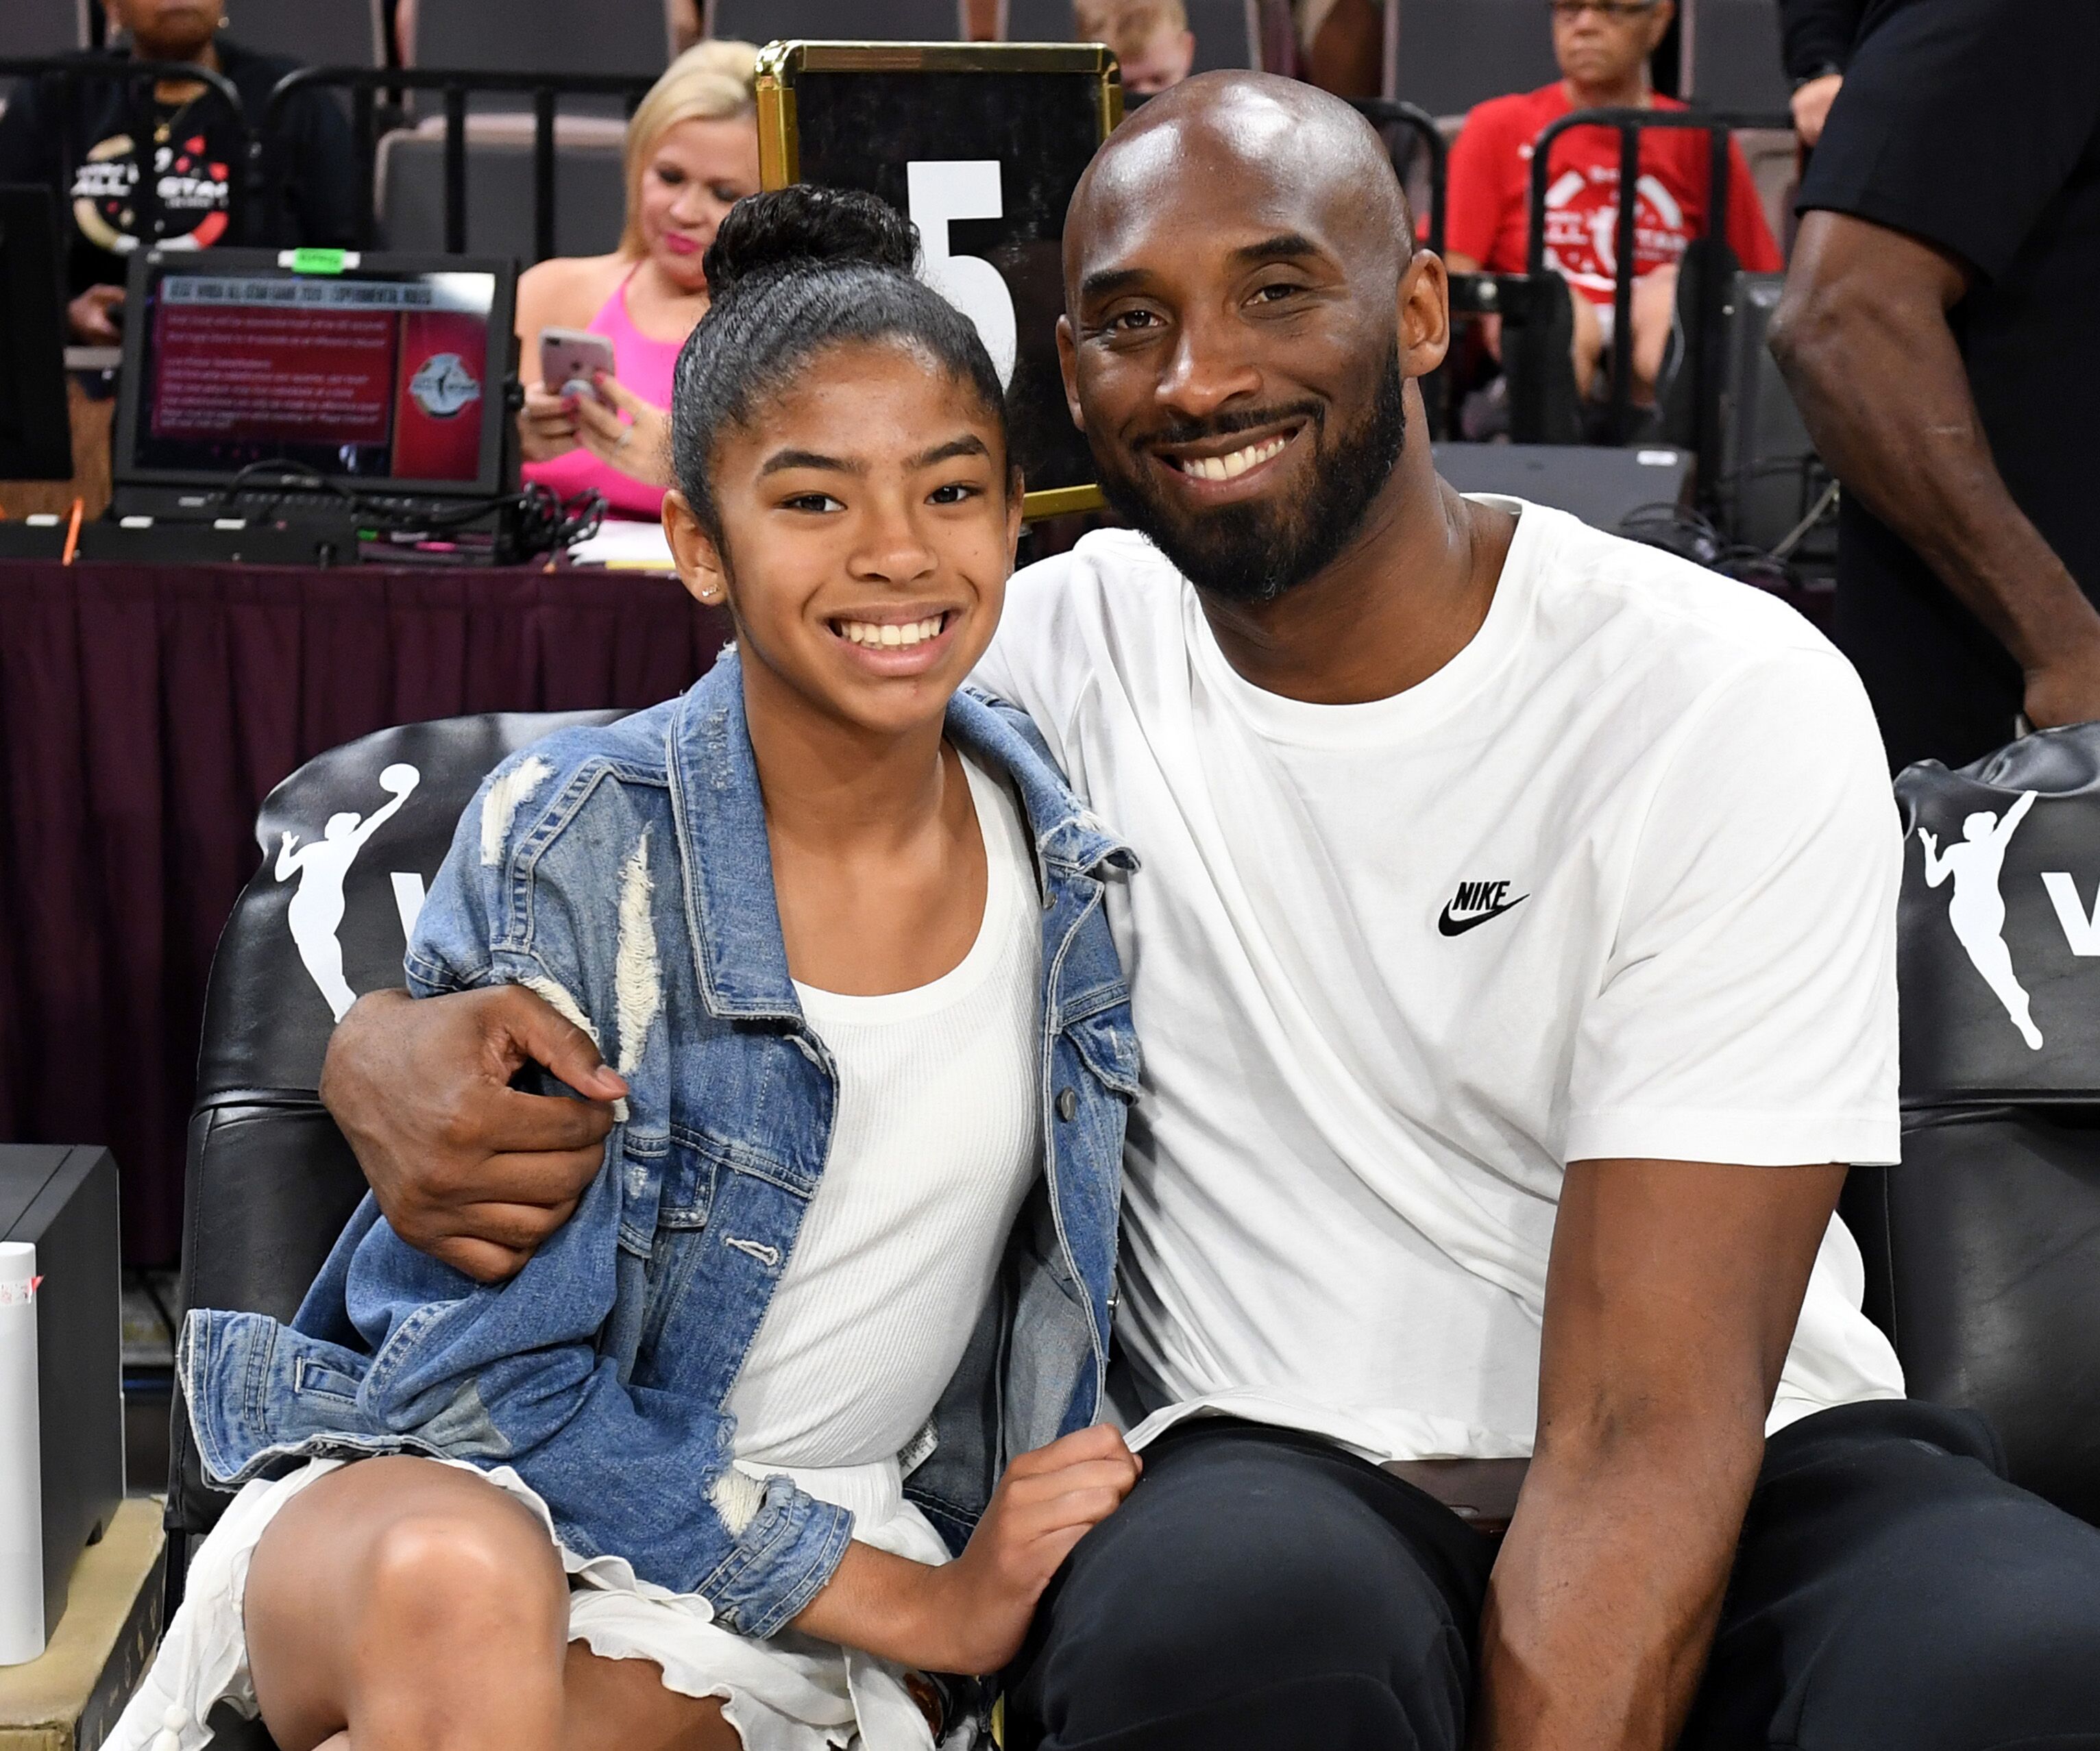 Gianna Bryant and her father, former NBA player Kobe Bryant, at the WNBA All-Star Game 2019 on July 27, 2019 in Las Vegas, Nevada. | Photo: Getty Images